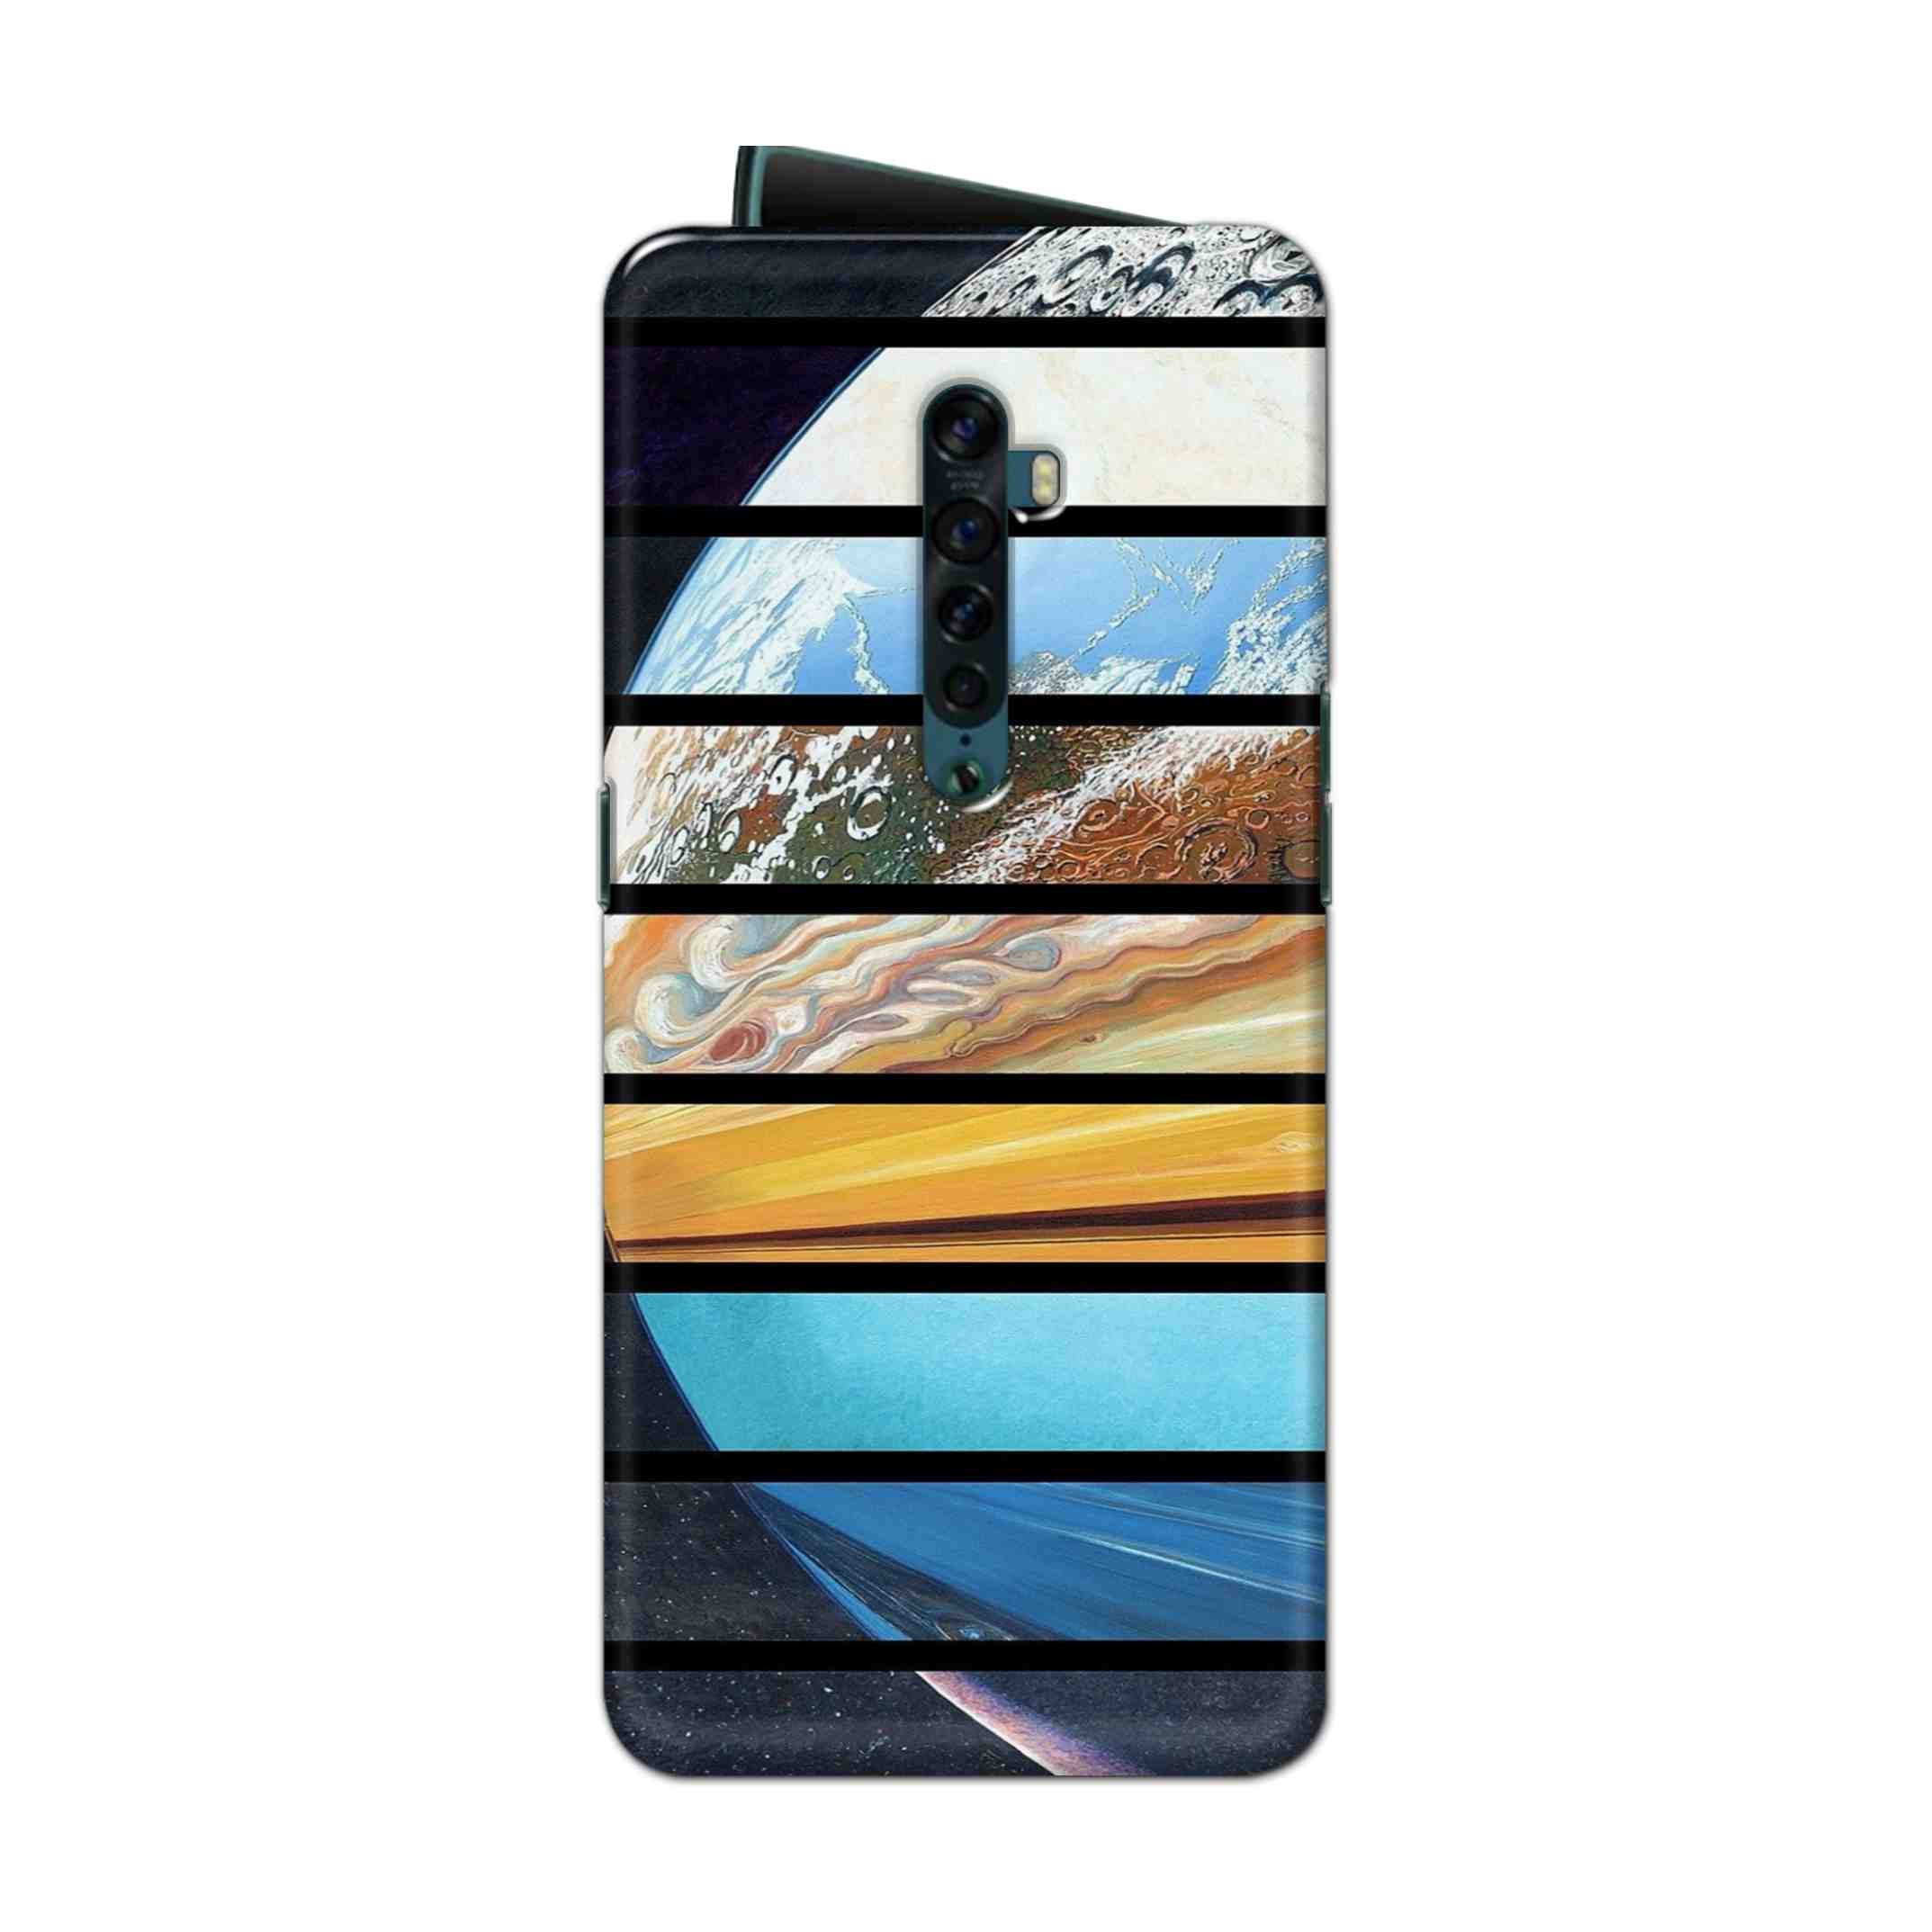 Buy Colourful Earth Hard Back Mobile Phone Case Cover For Oppo Reno 2 Online